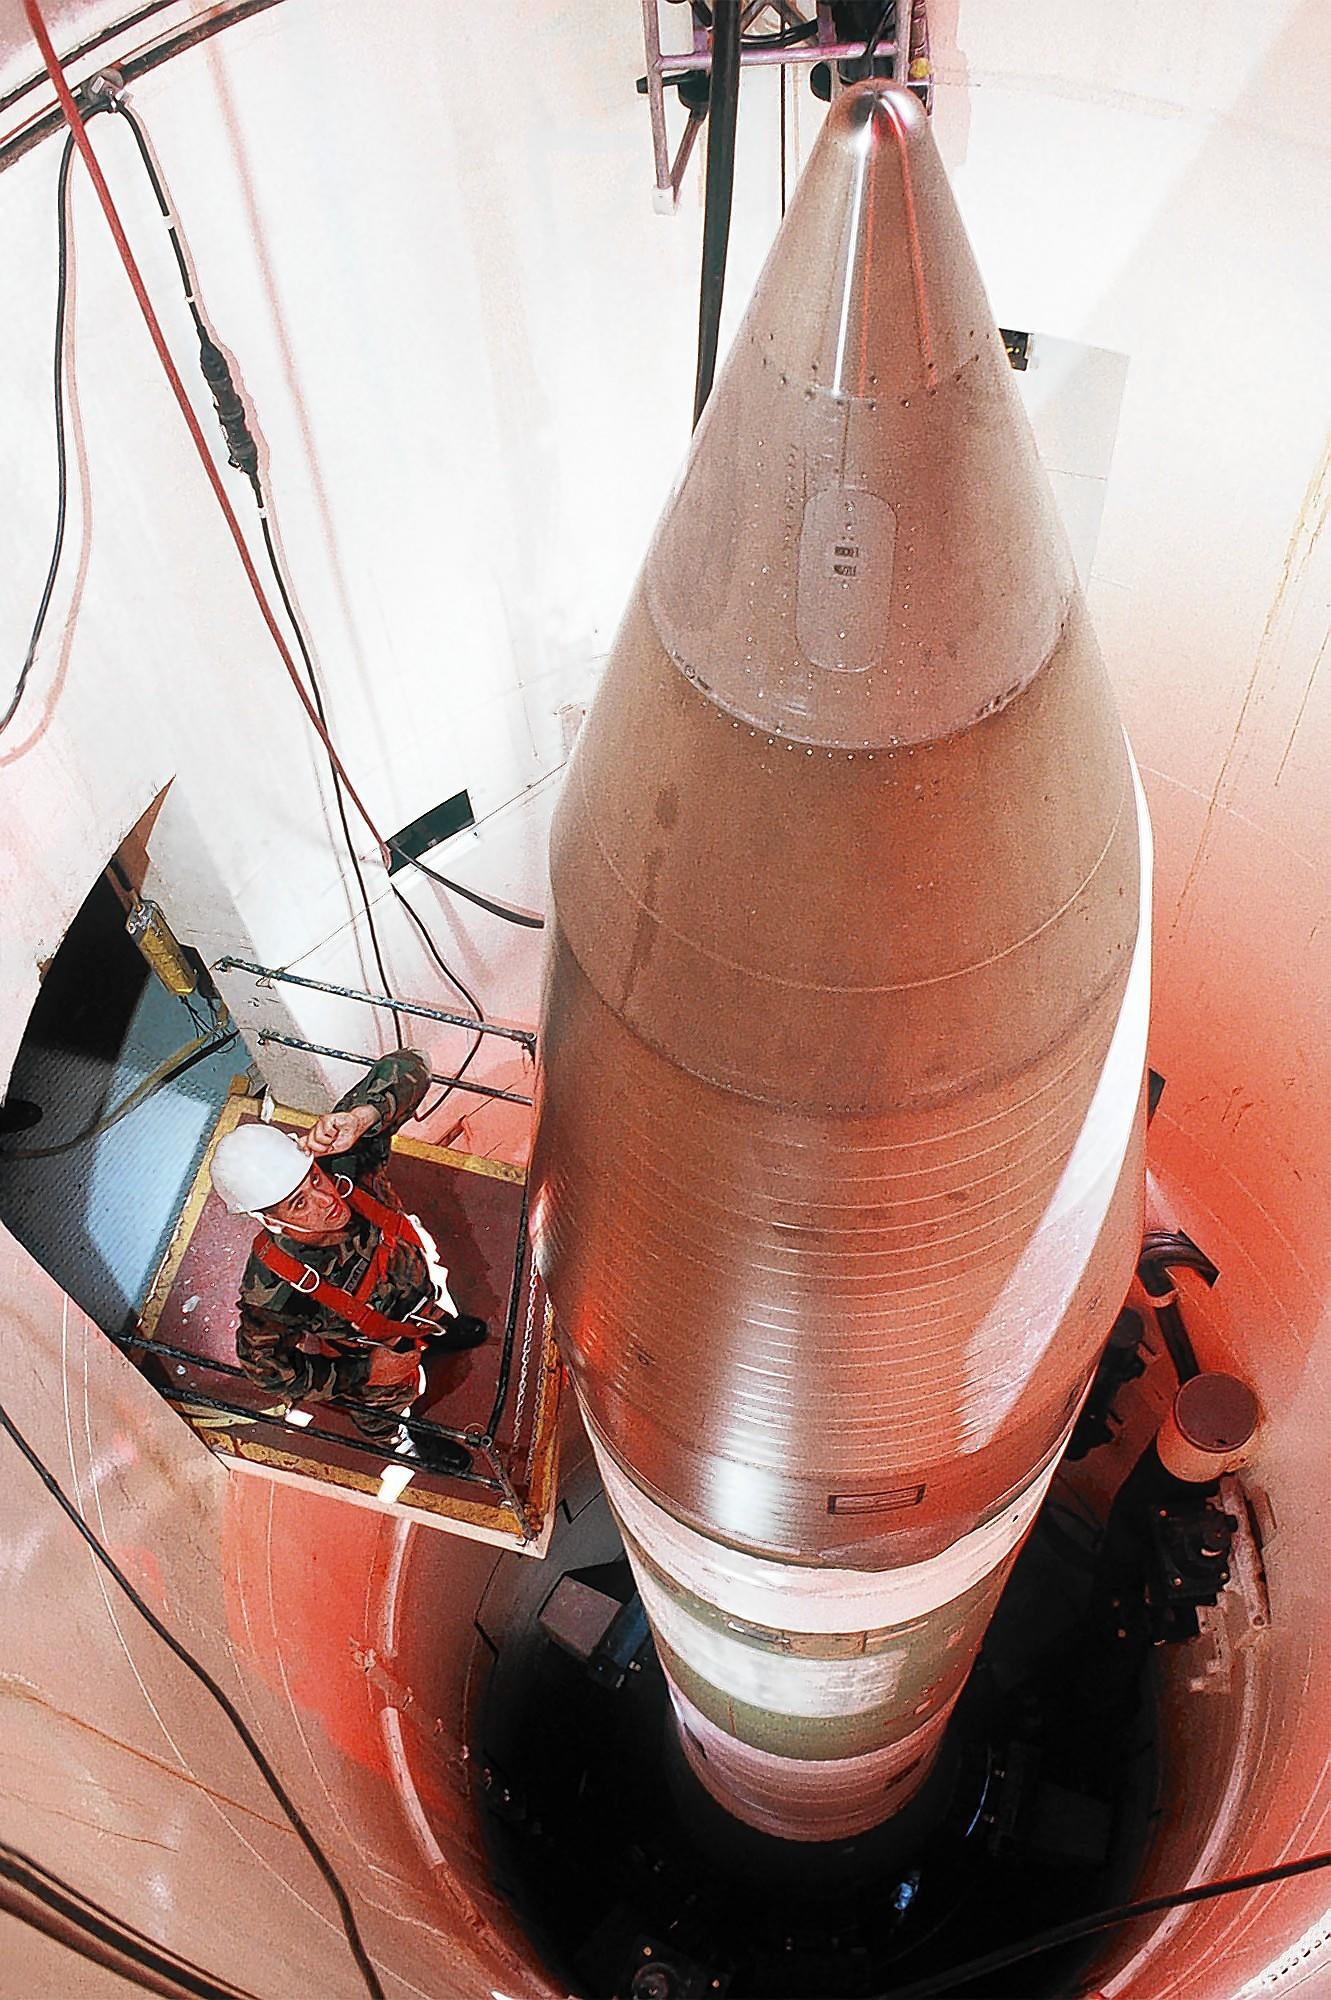 The U.S. keeps 450 Minuteman III missiles at three Air Force bases in North Dakota, Montana and Wyoming.